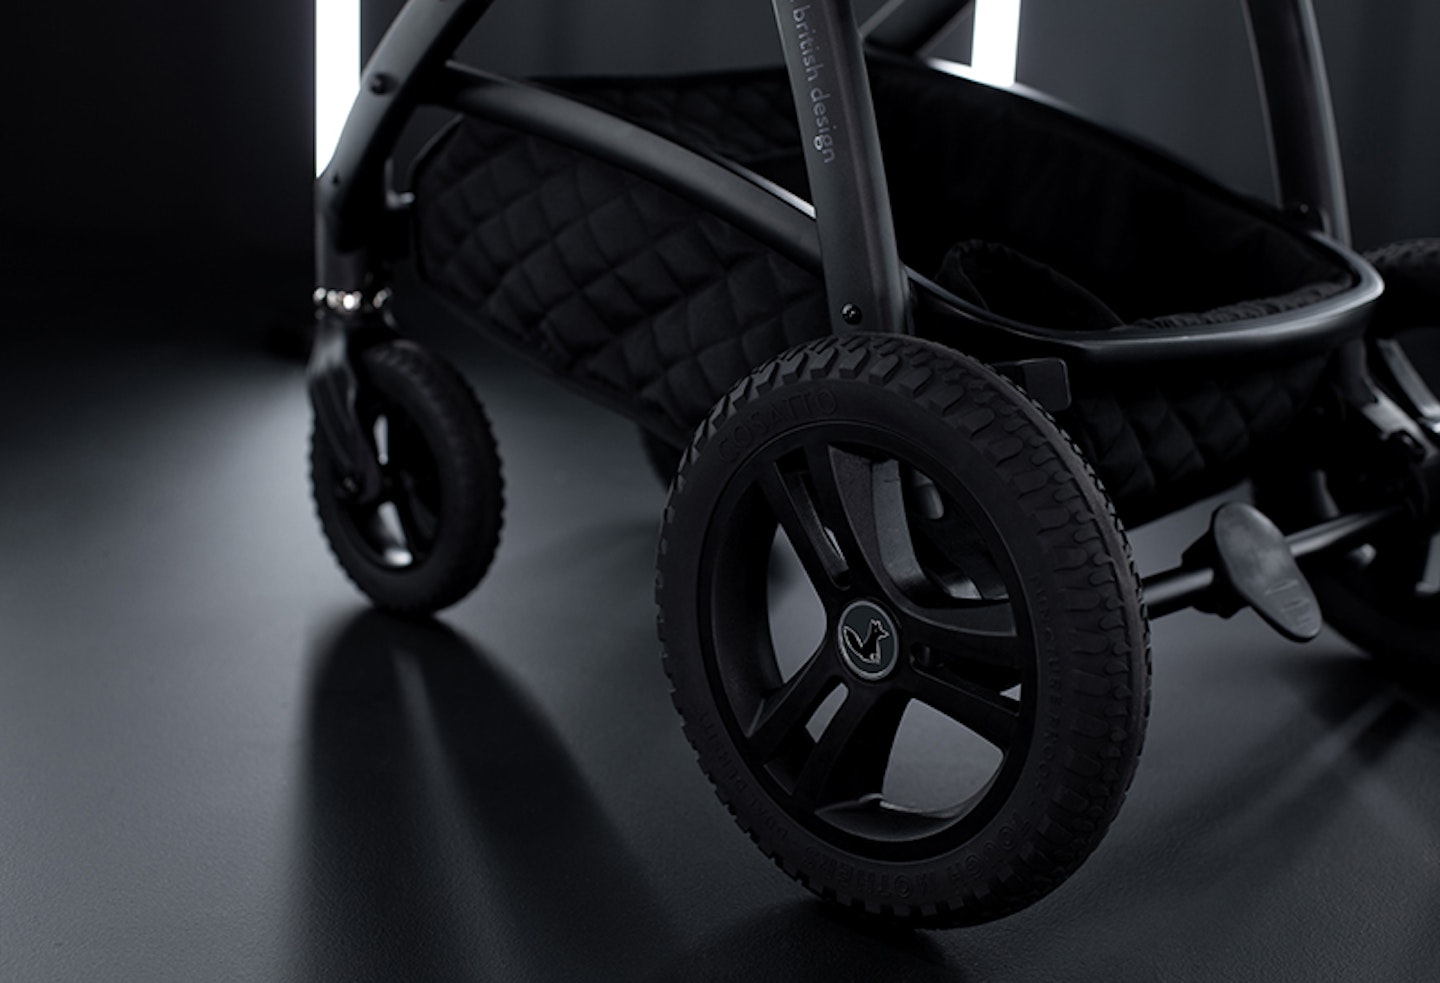 COSATTO_WOW_2_SILHOUETTE_LIFESTYLE-DETAILS-WHEEL